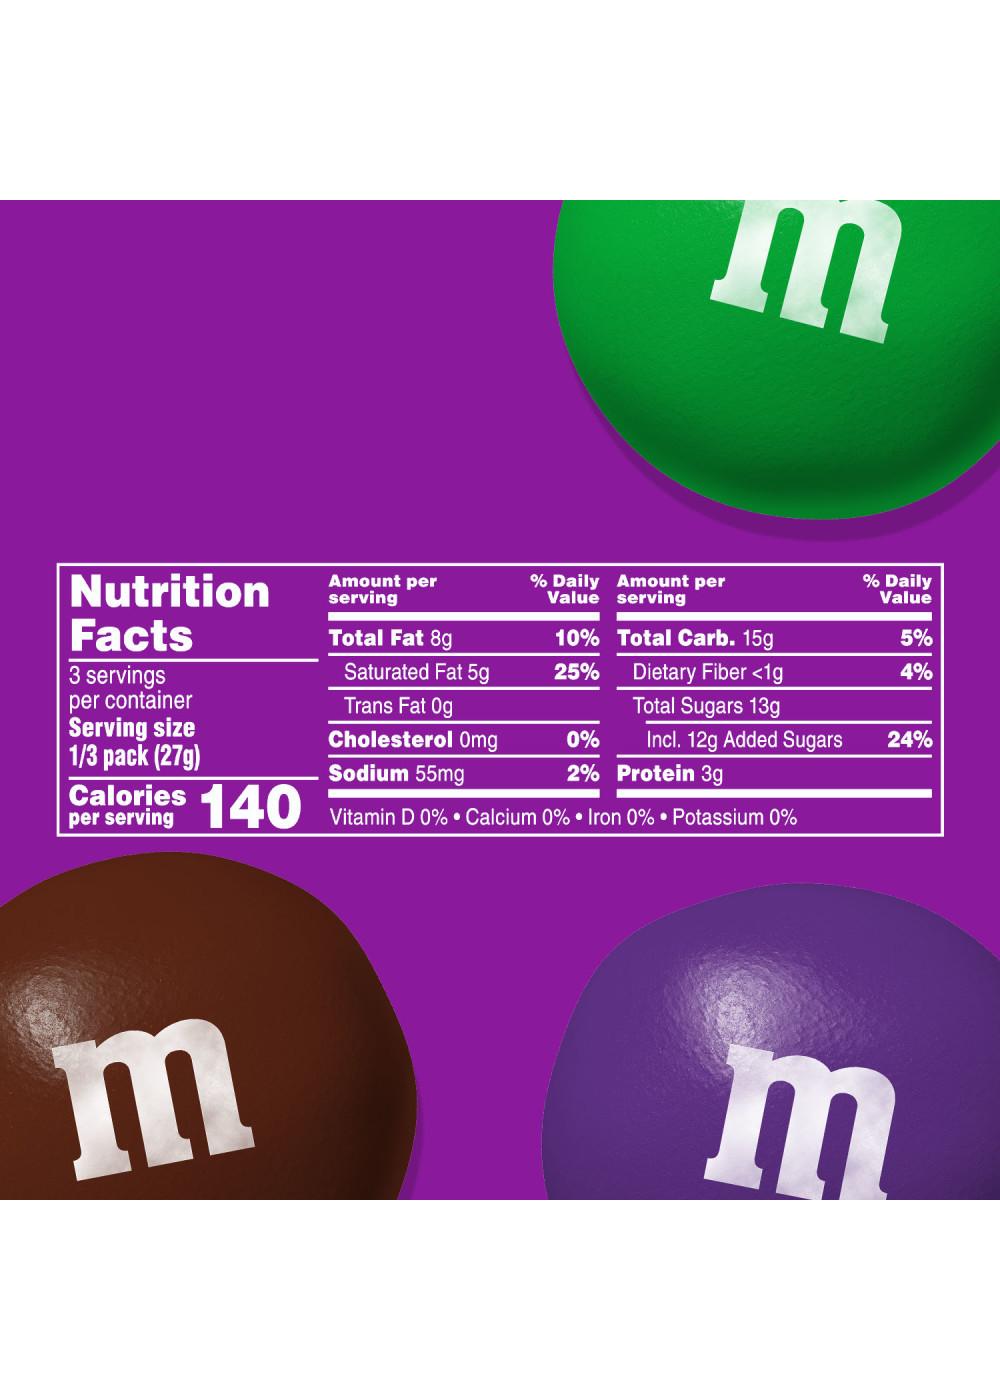 M&M'S Limited Edition Peanut Butter Chocolate Candy - Purple Moment Share  Size - Shop Candy at H-E-B